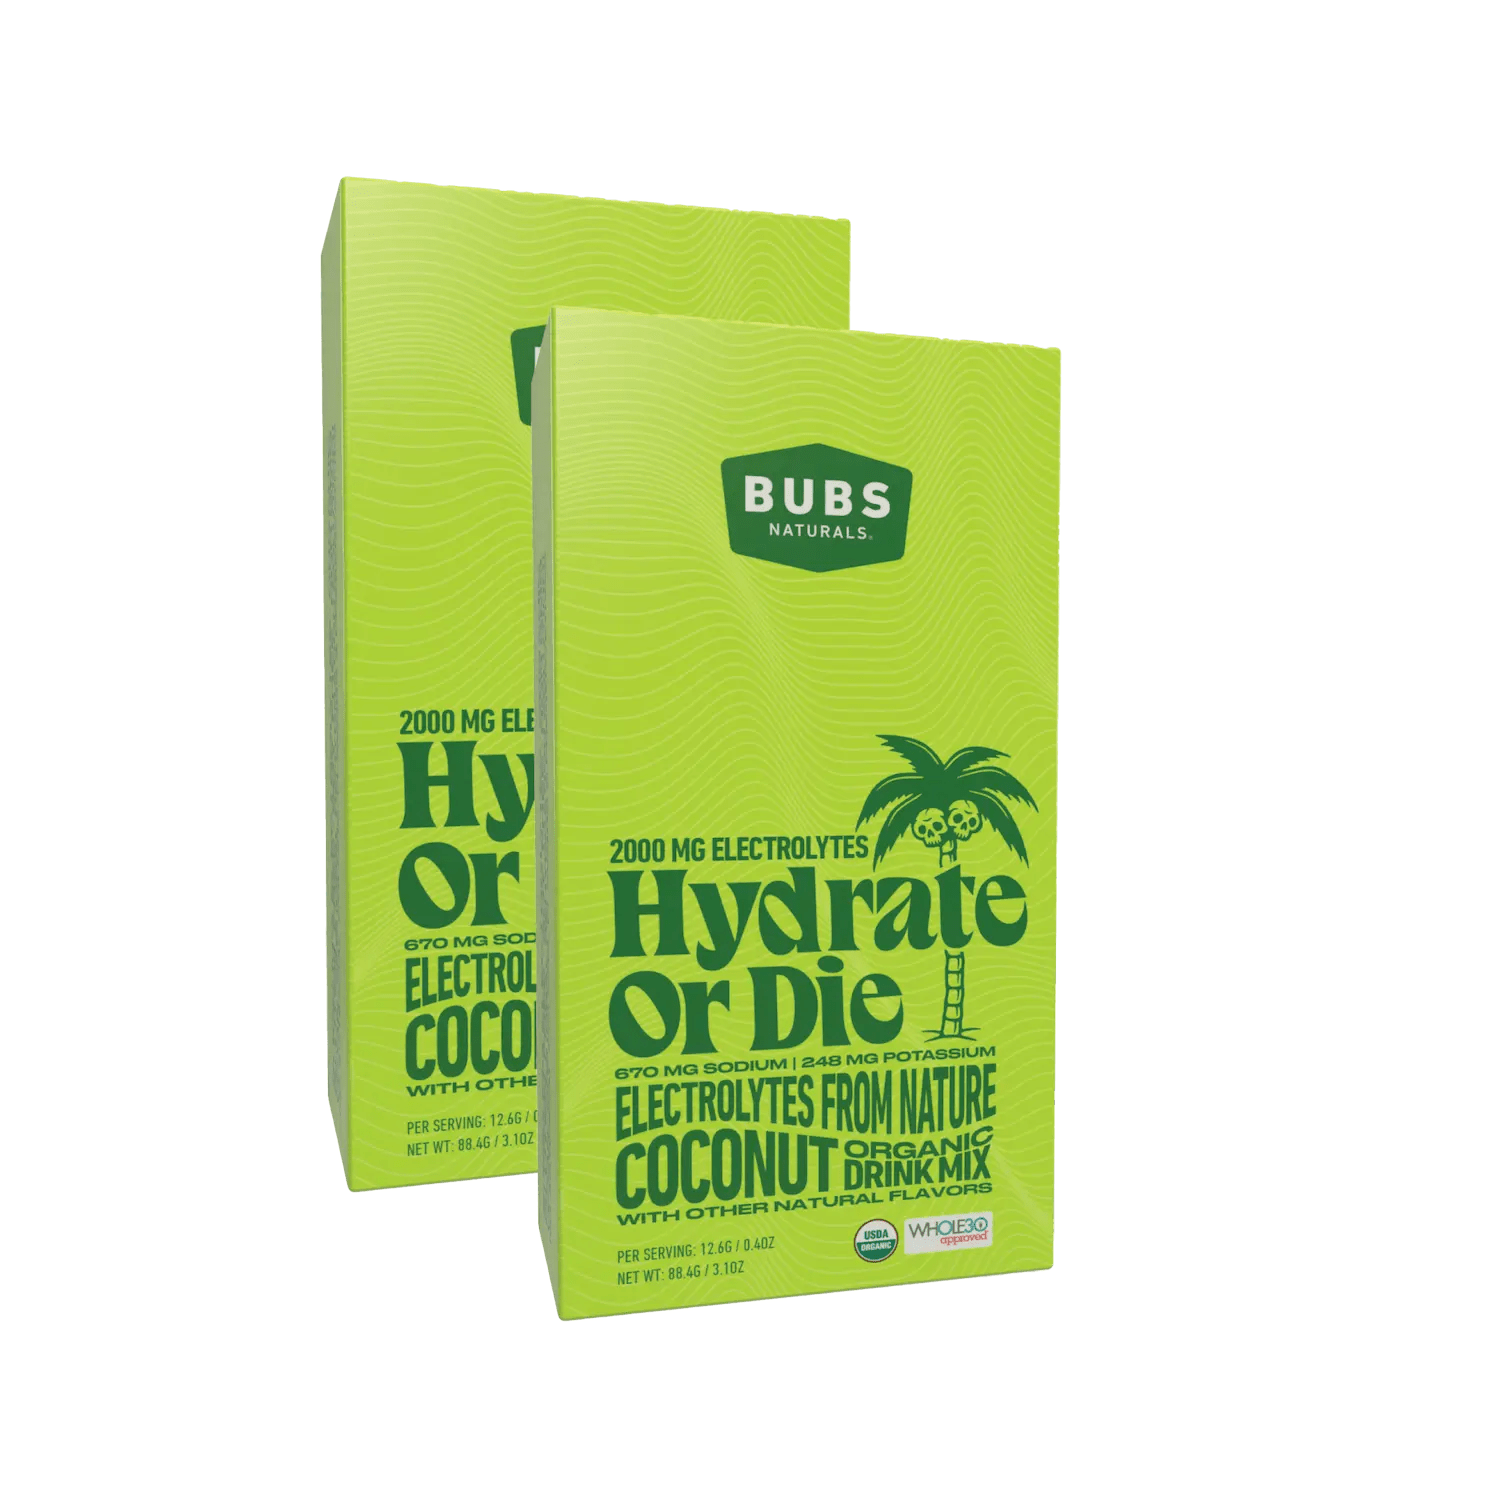 BUBS Naturals Hydrate or Die Electrolyte Cartons, coconut, bundle of 2